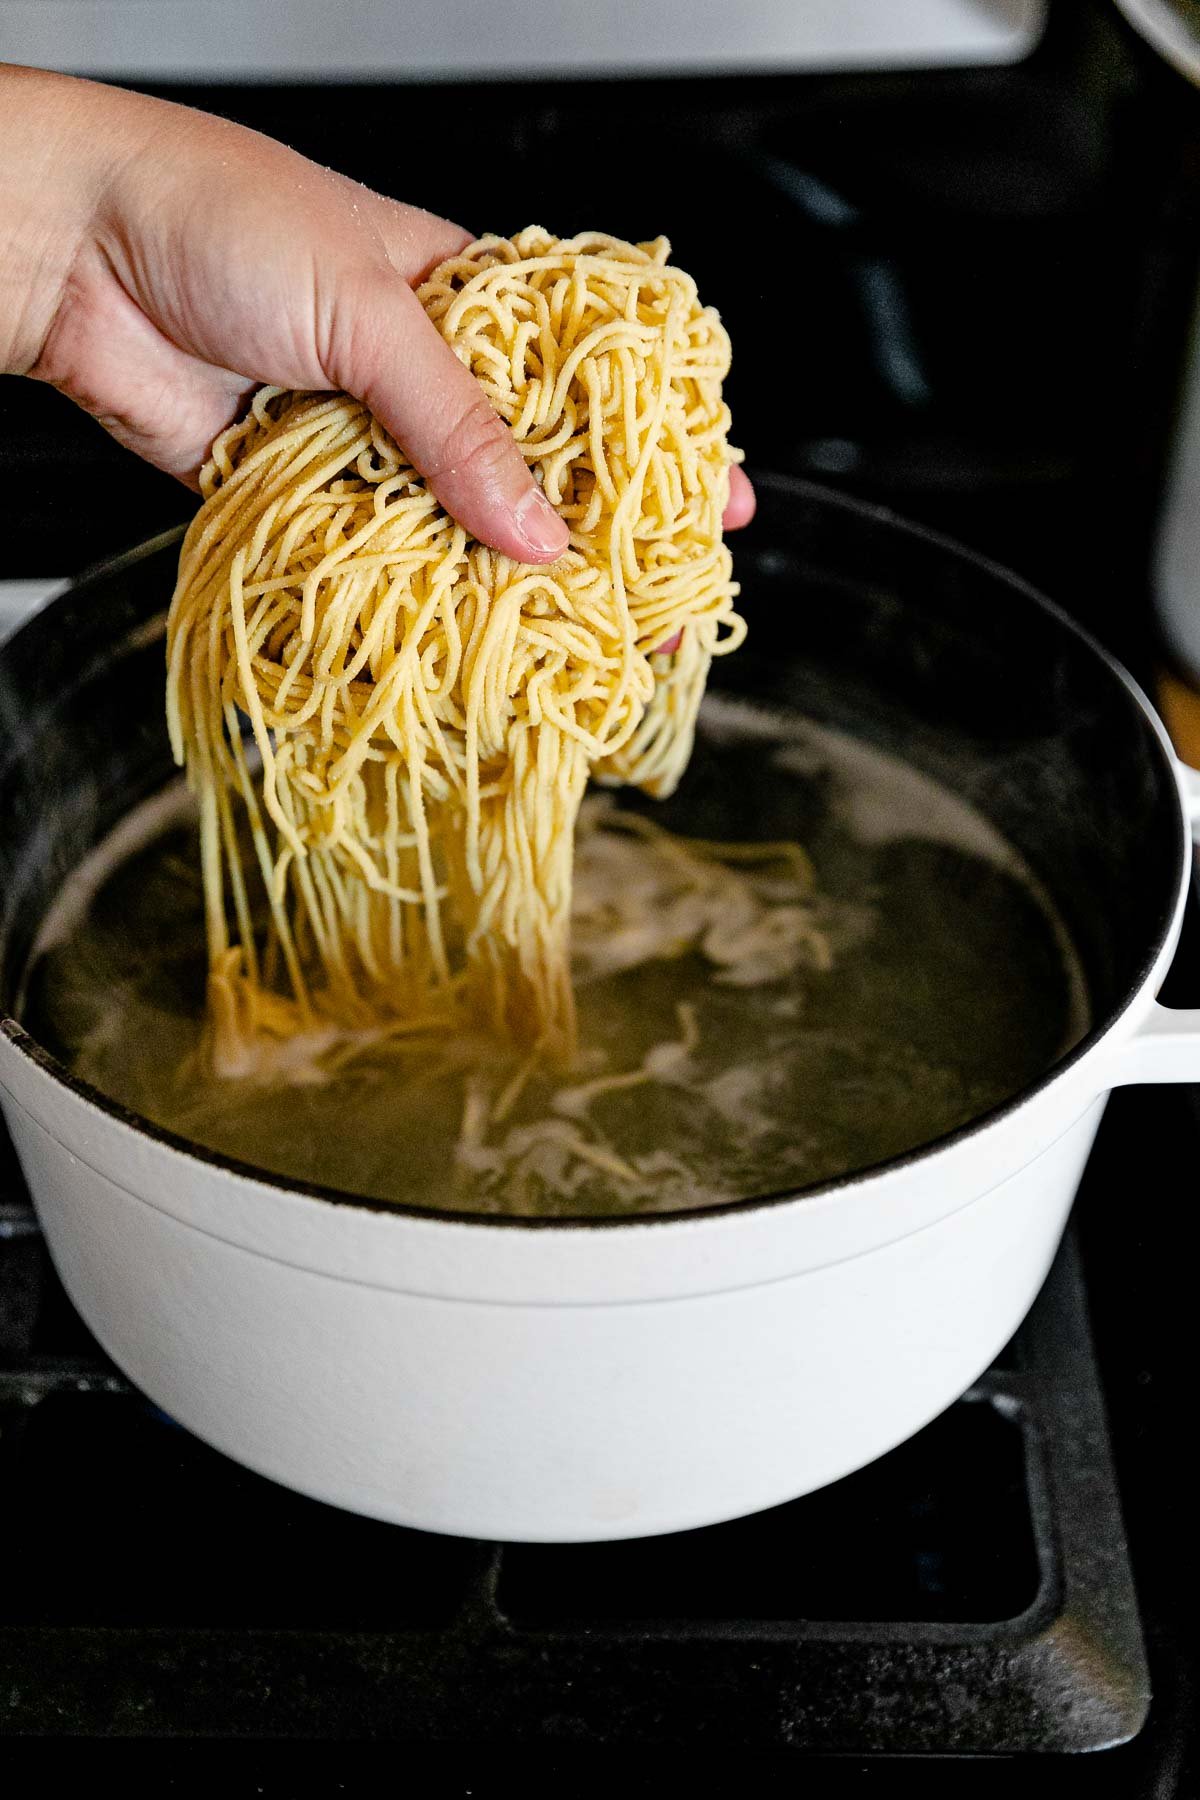 A woman's hand adds fresh homemade pasta to a white pot filled with boiling water. The pot rests atop a gas stovetop range.